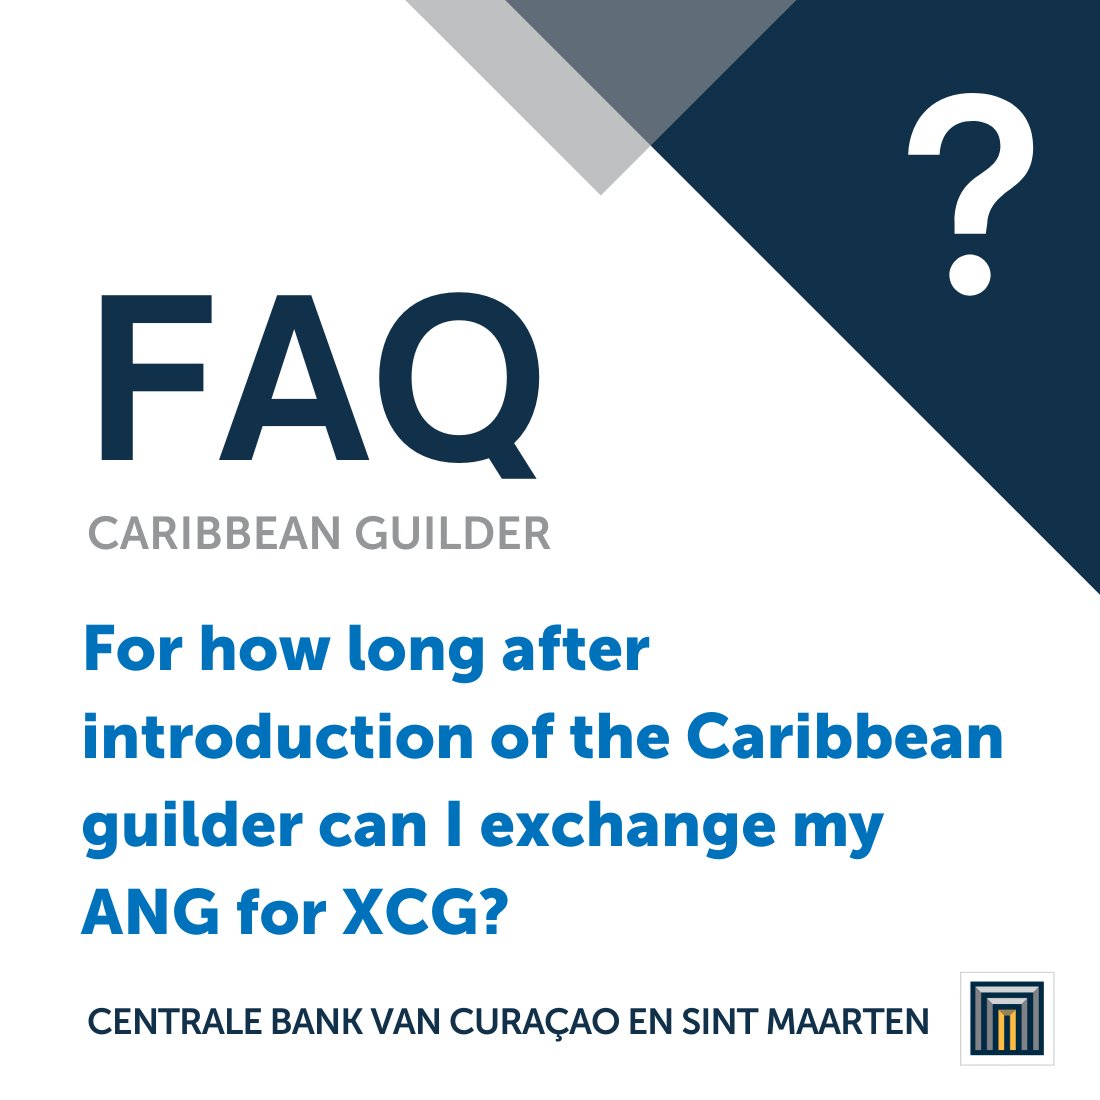 Exchanges can be made at the commercial banks for 12 months after introduction of the Caribbean guilder. After these 12 months, ANG can still be exchanged at the CBCS for up to 30 years after the introduction date.

More FAQ's: https://t.co/x9vkpWt9VG

#curacao #sintmaarten #xcg https://t.co/T6fs6YeIgS